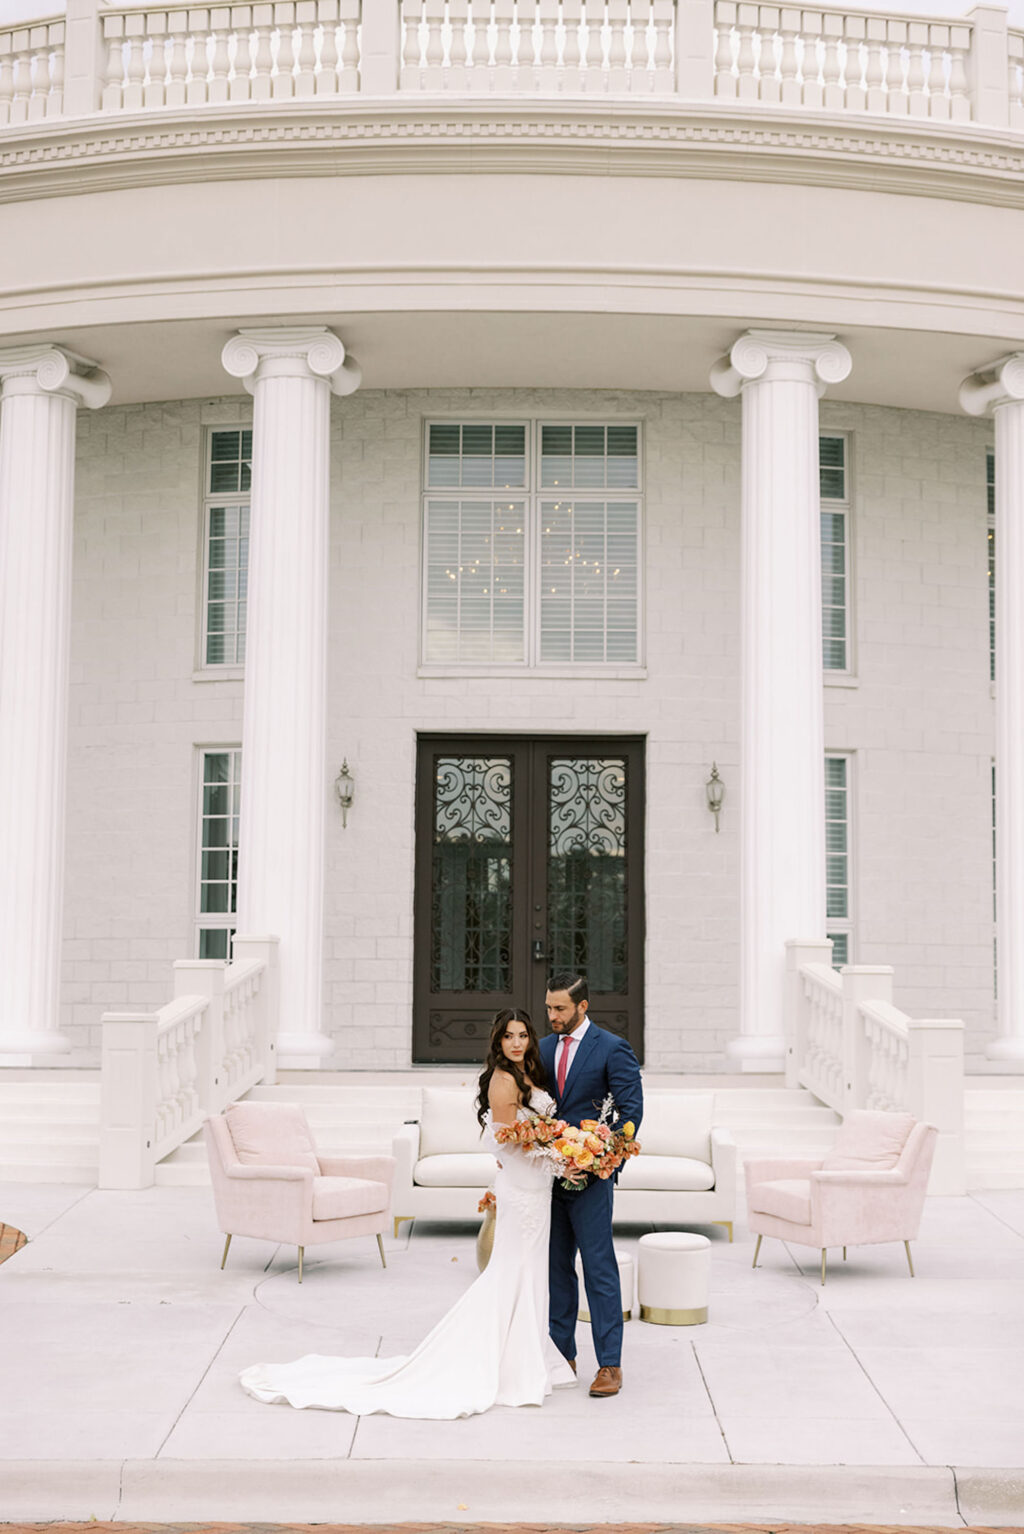 Neoclassical Architectural Tarpon Springs Wedding Venue Whitehurst Gallery | Planner MDP Events